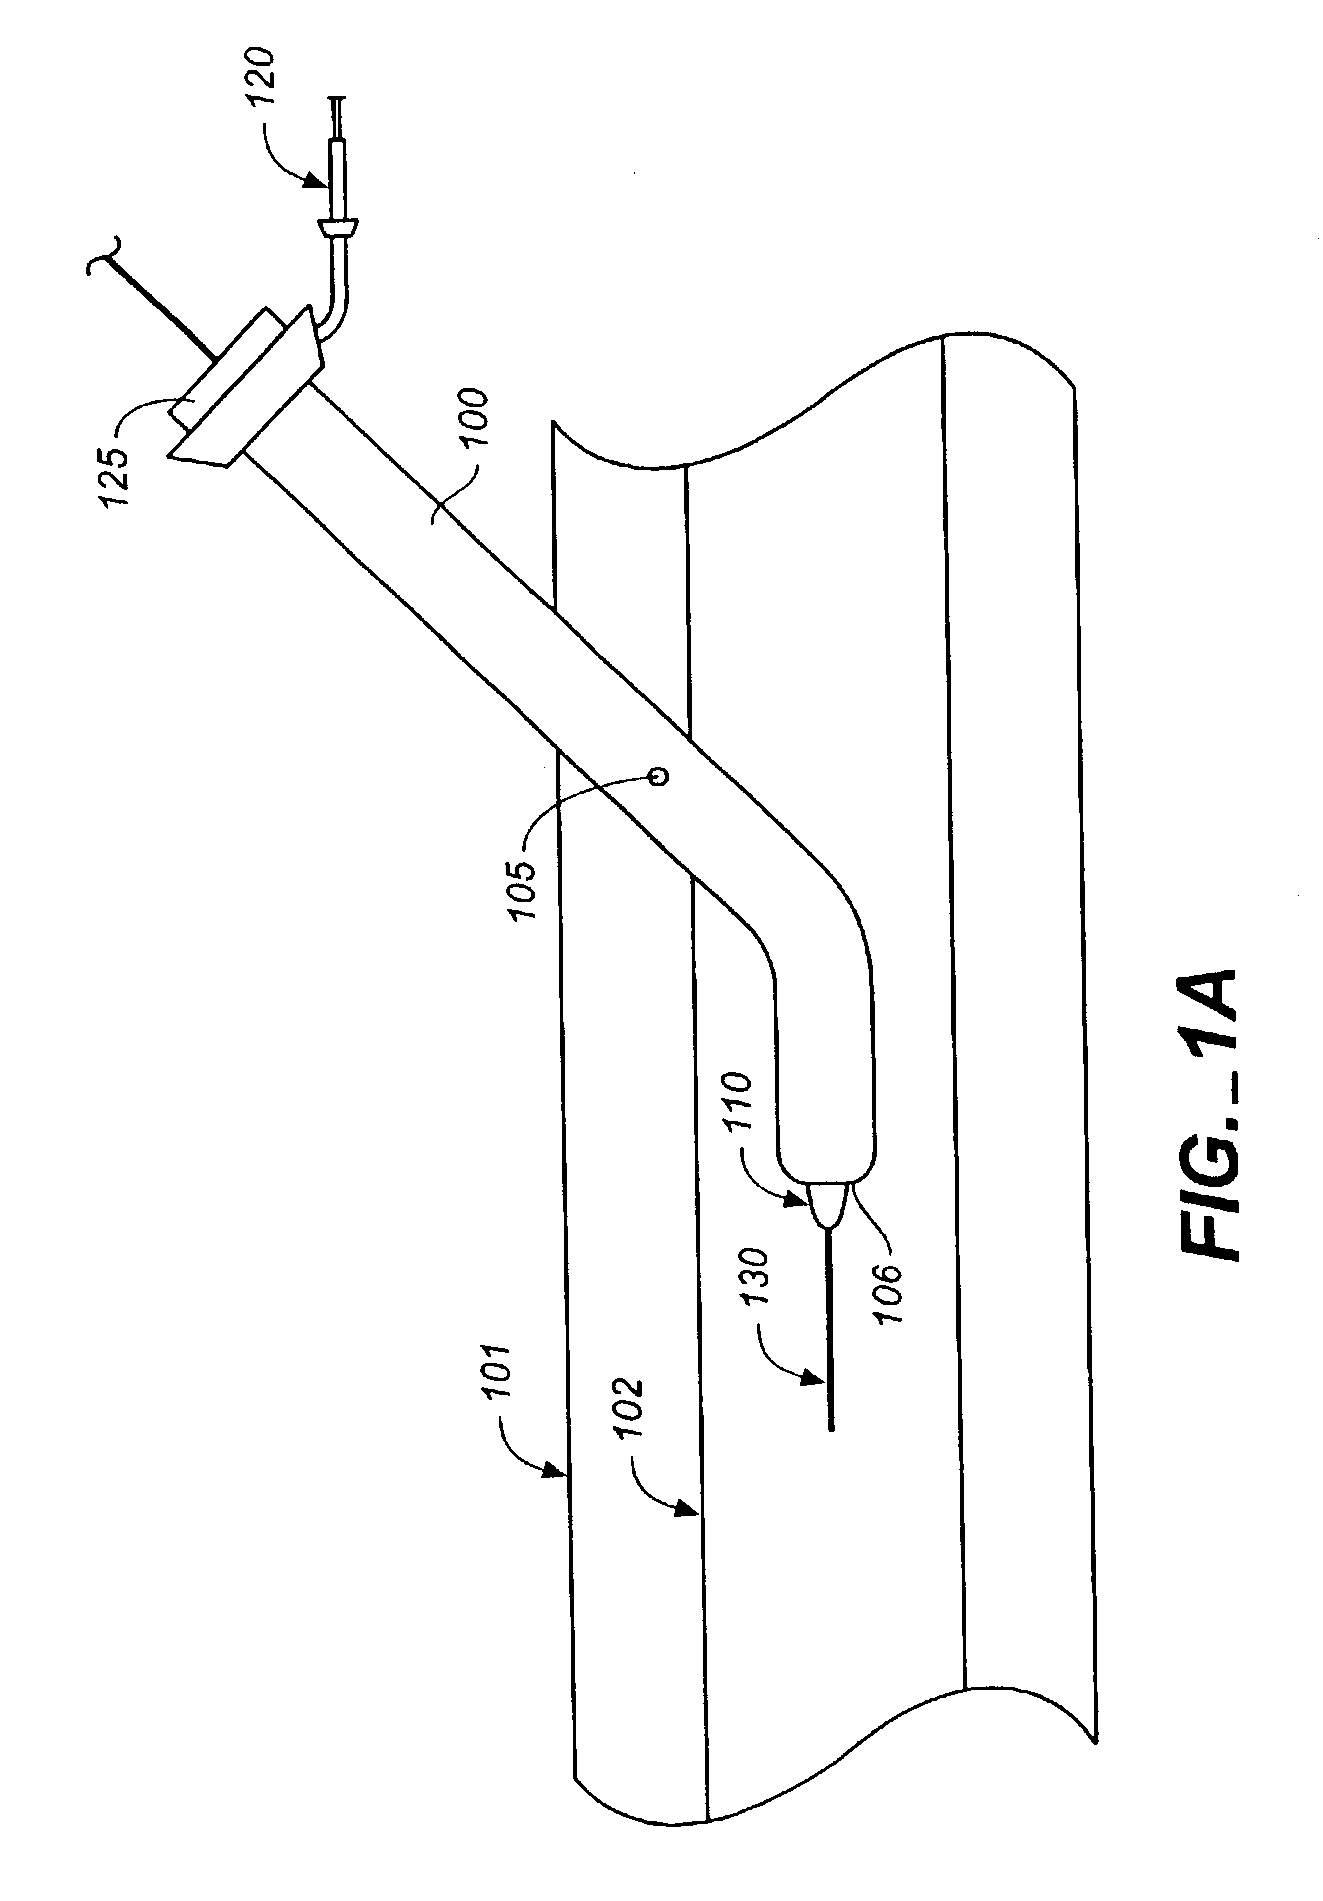 Vascular sealant delivery device and sheath introducer and method